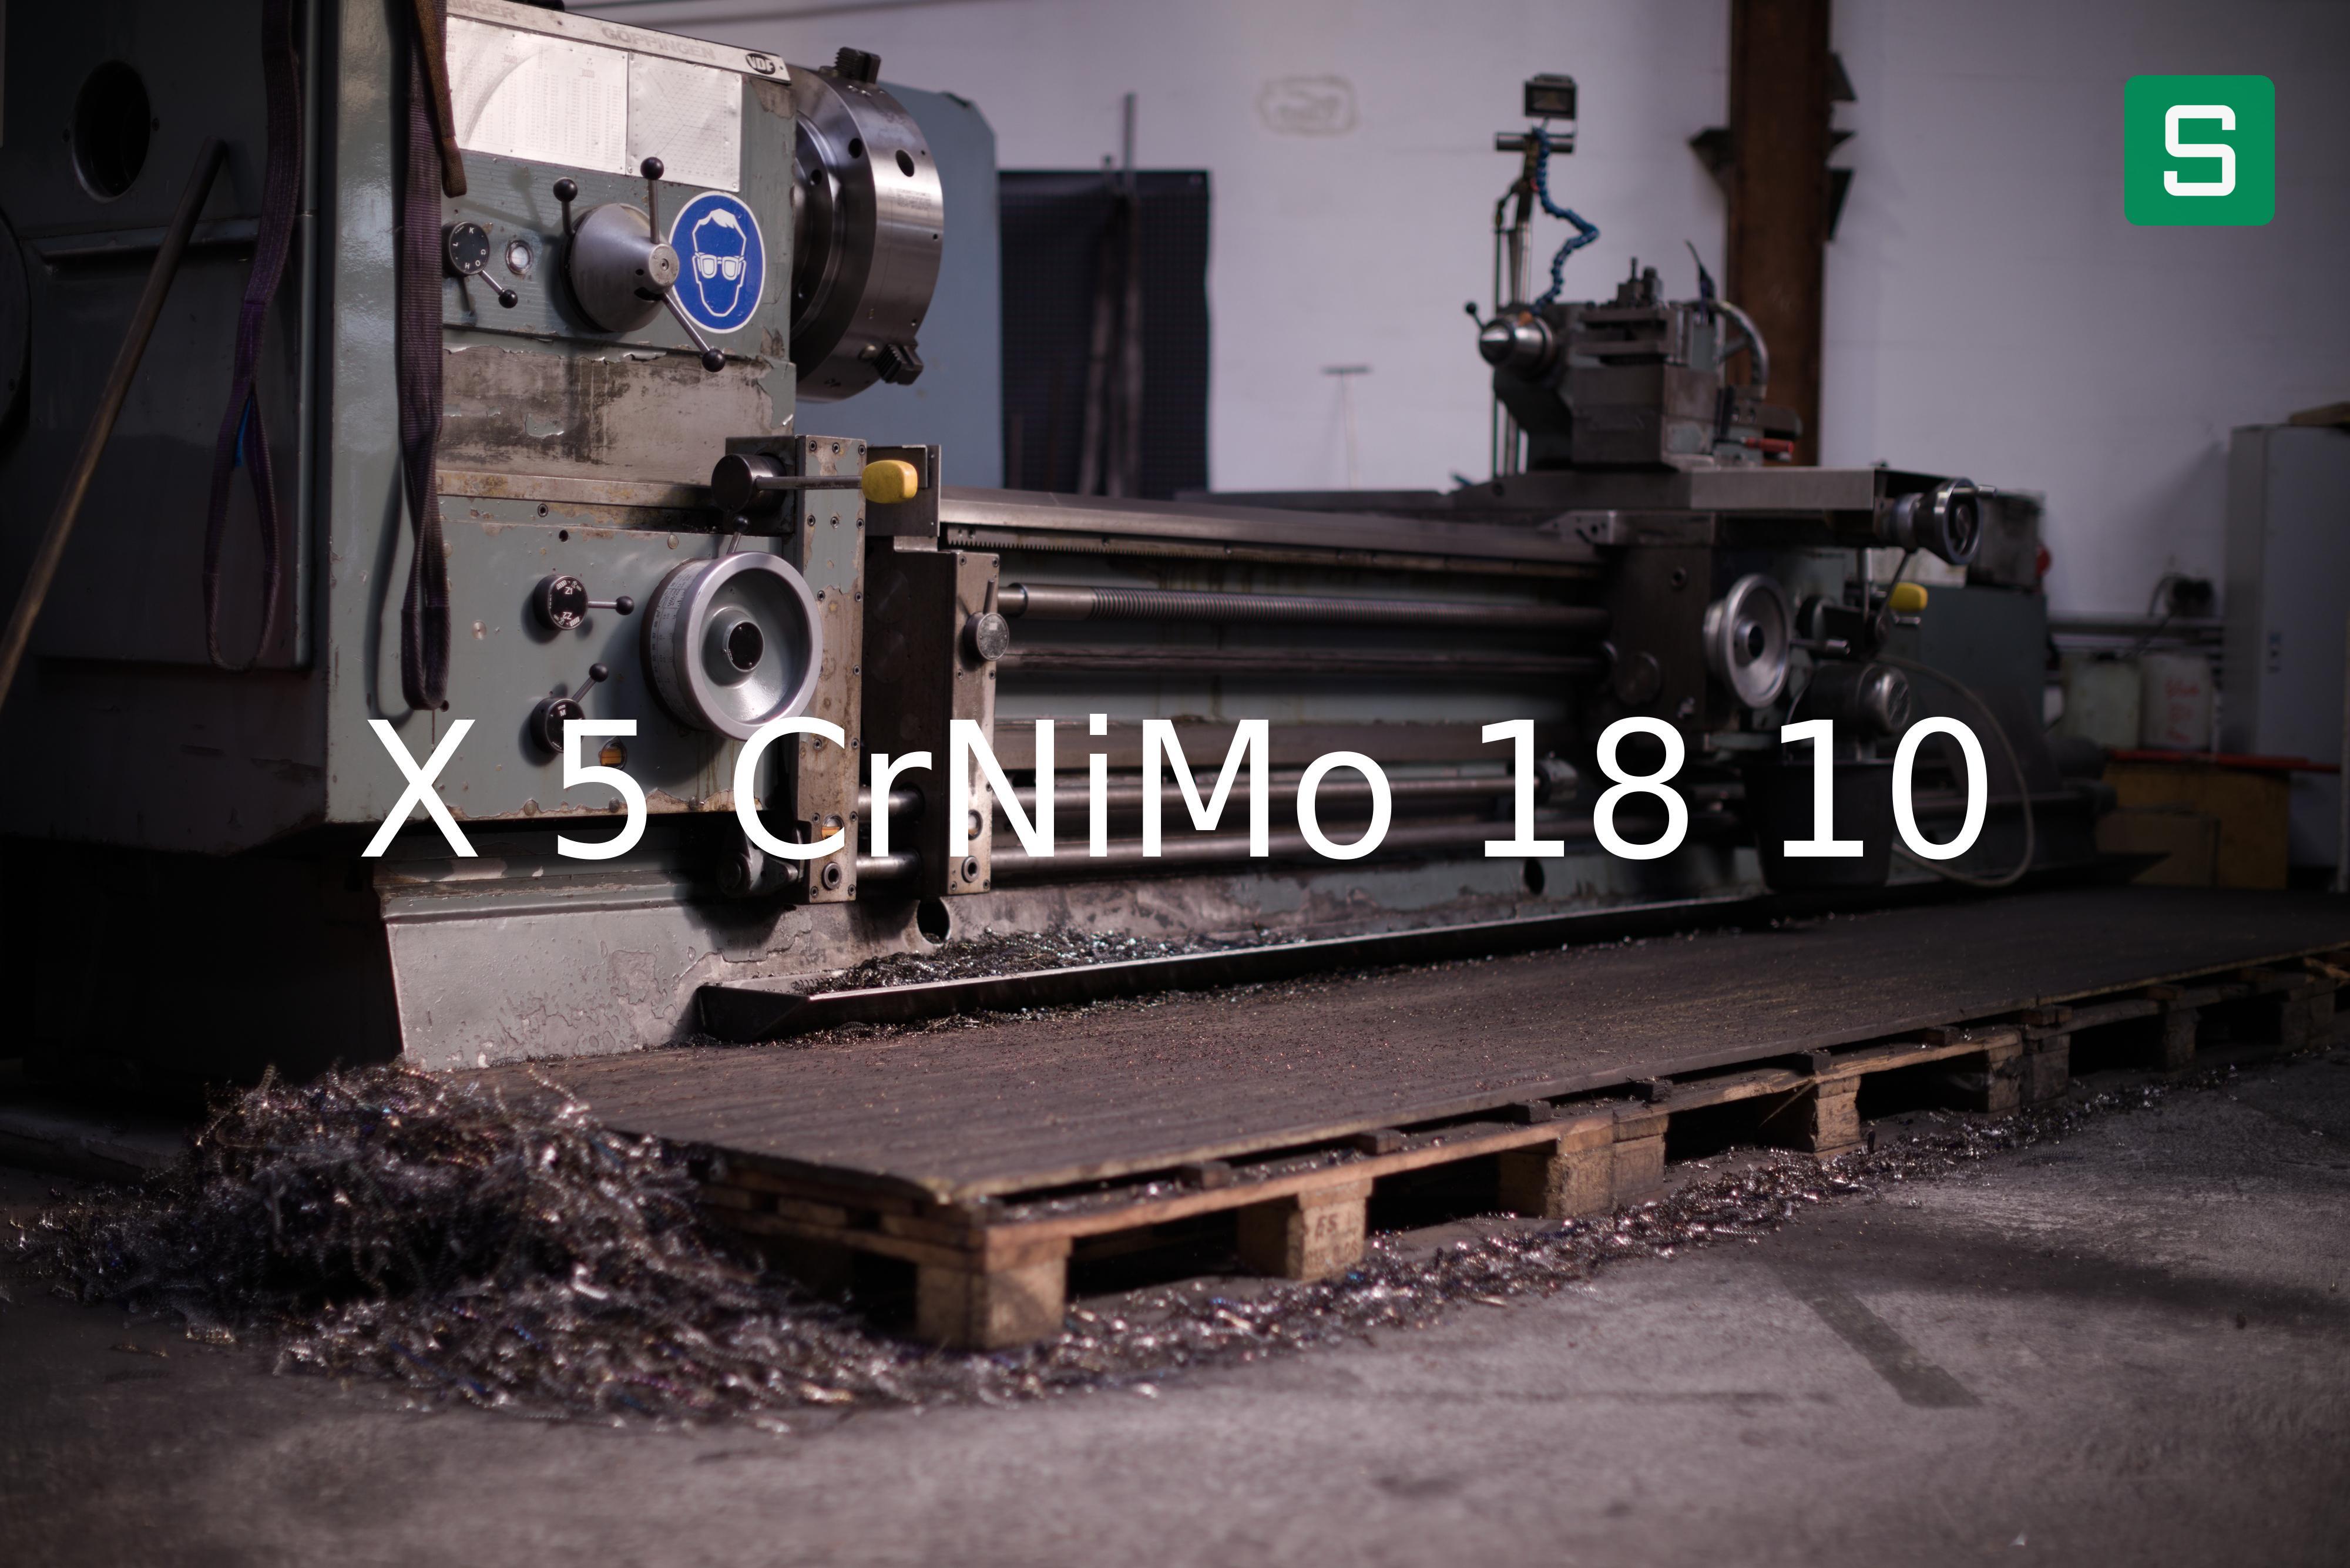 Steel Material: X 5 CrNiMo 18 10